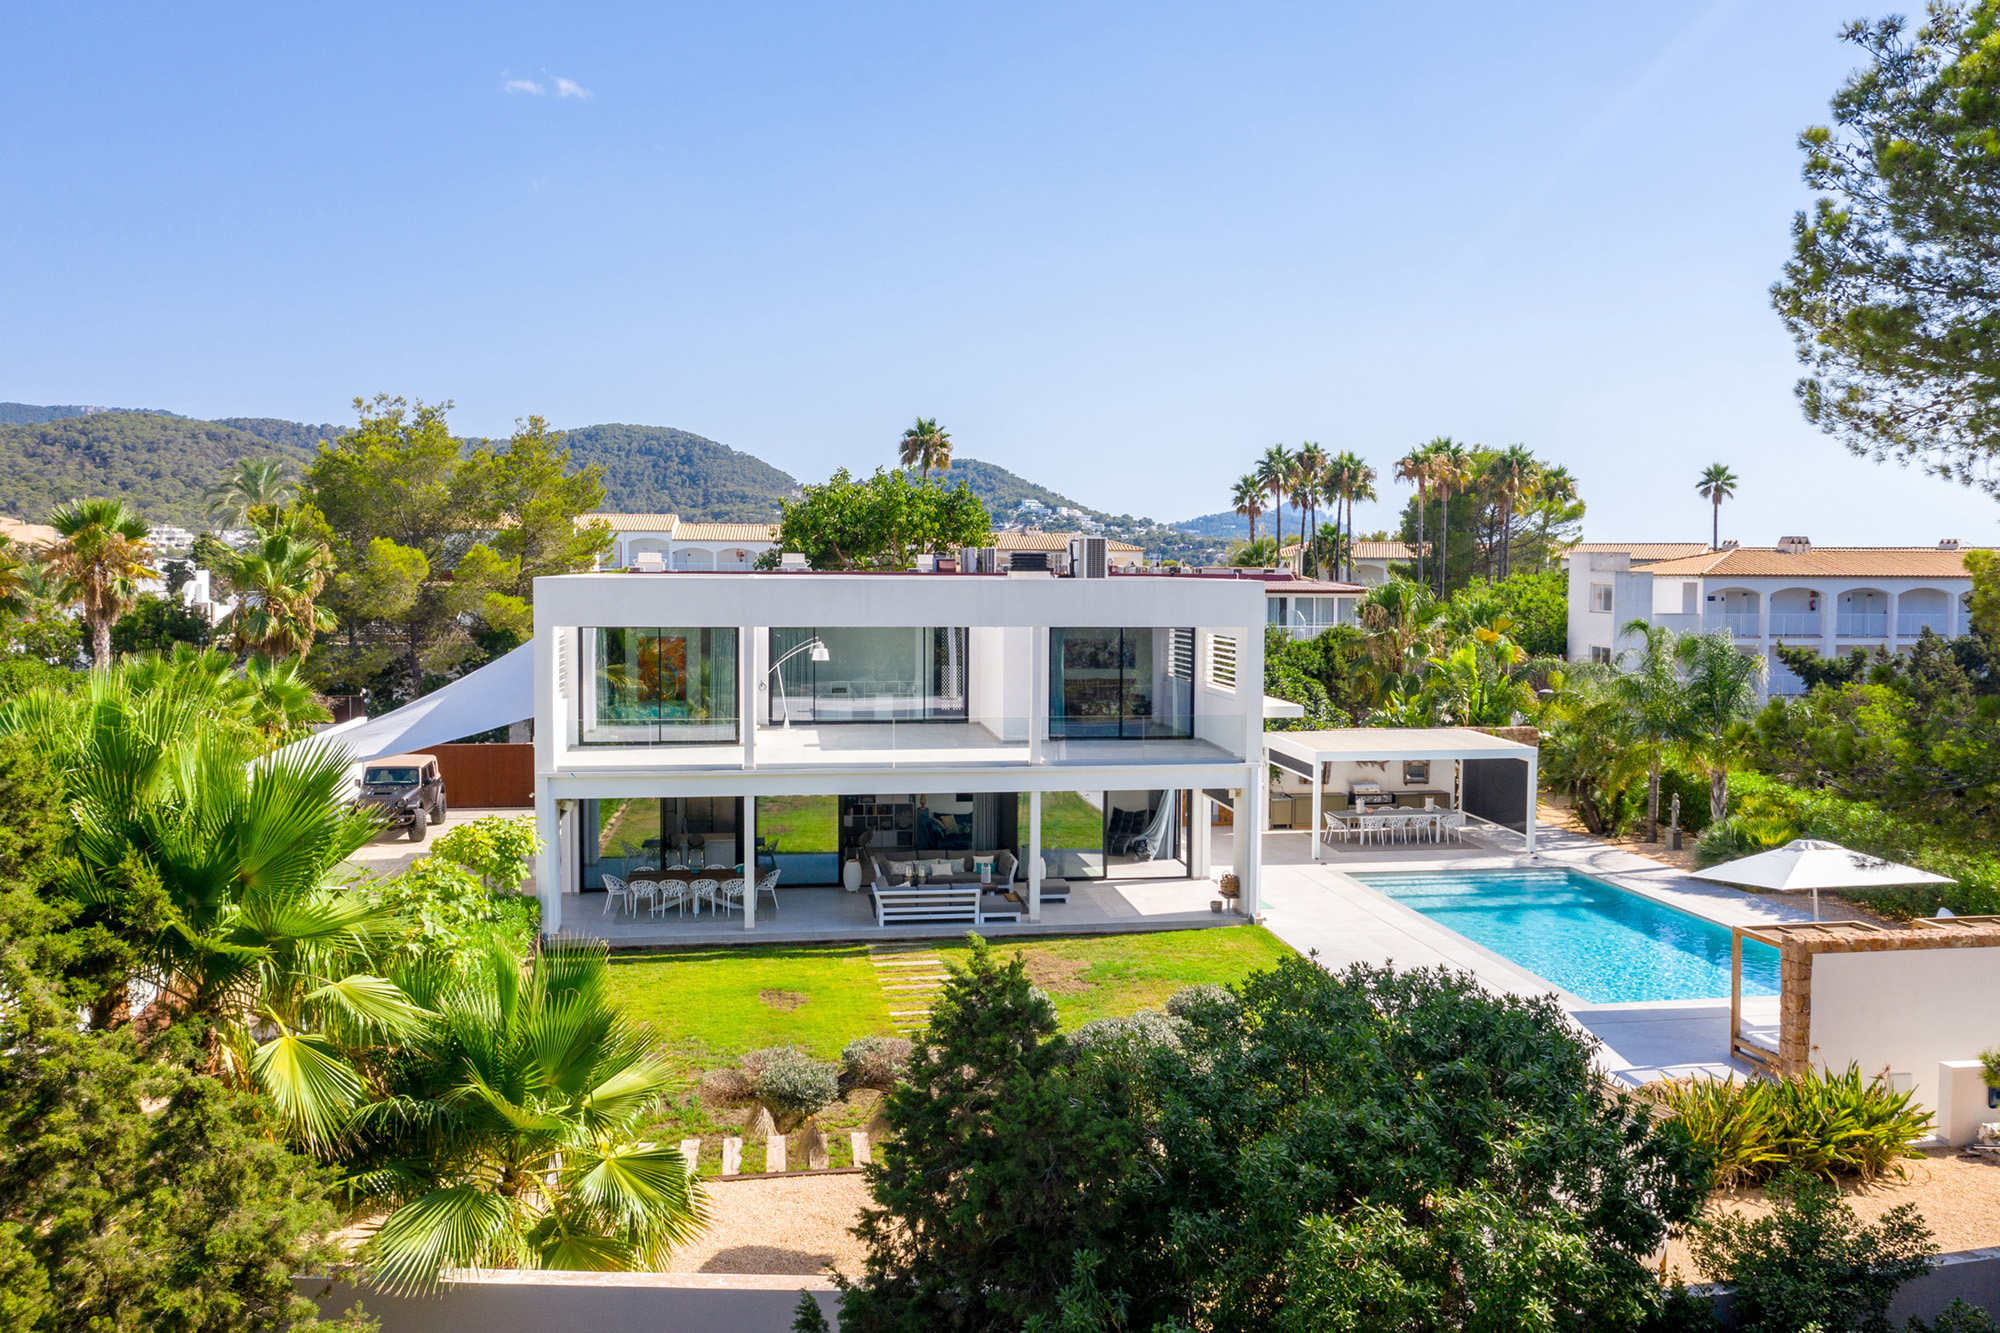 Front view of a luxury villa for sale in Ibiza